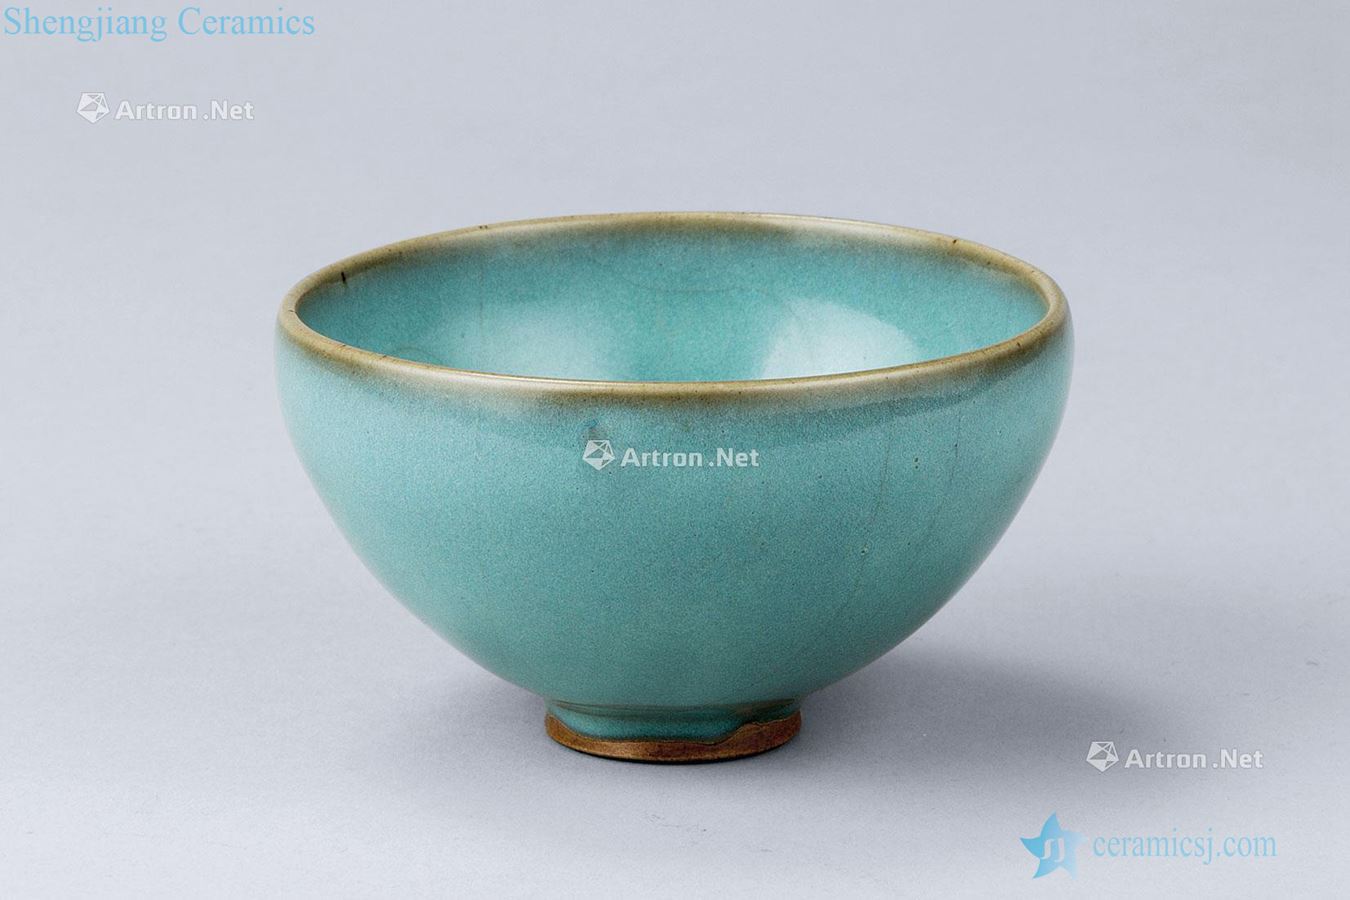 The yuan dynasty (1279-1368) bowl masterpieces